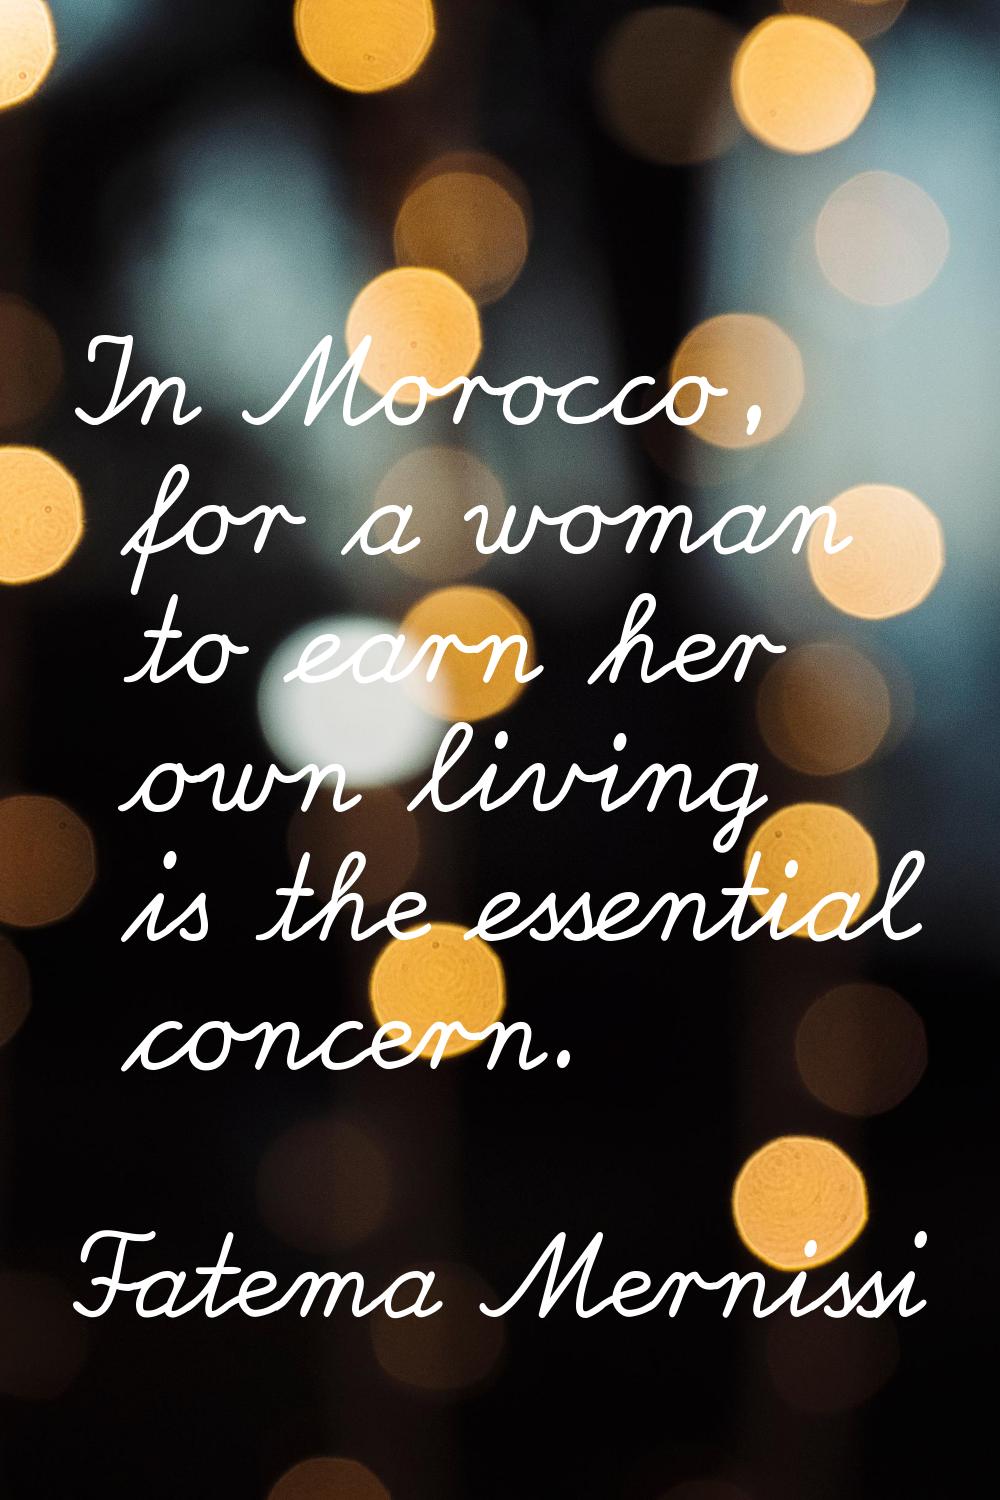 In Morocco, for a woman to earn her own living is the essential concern.